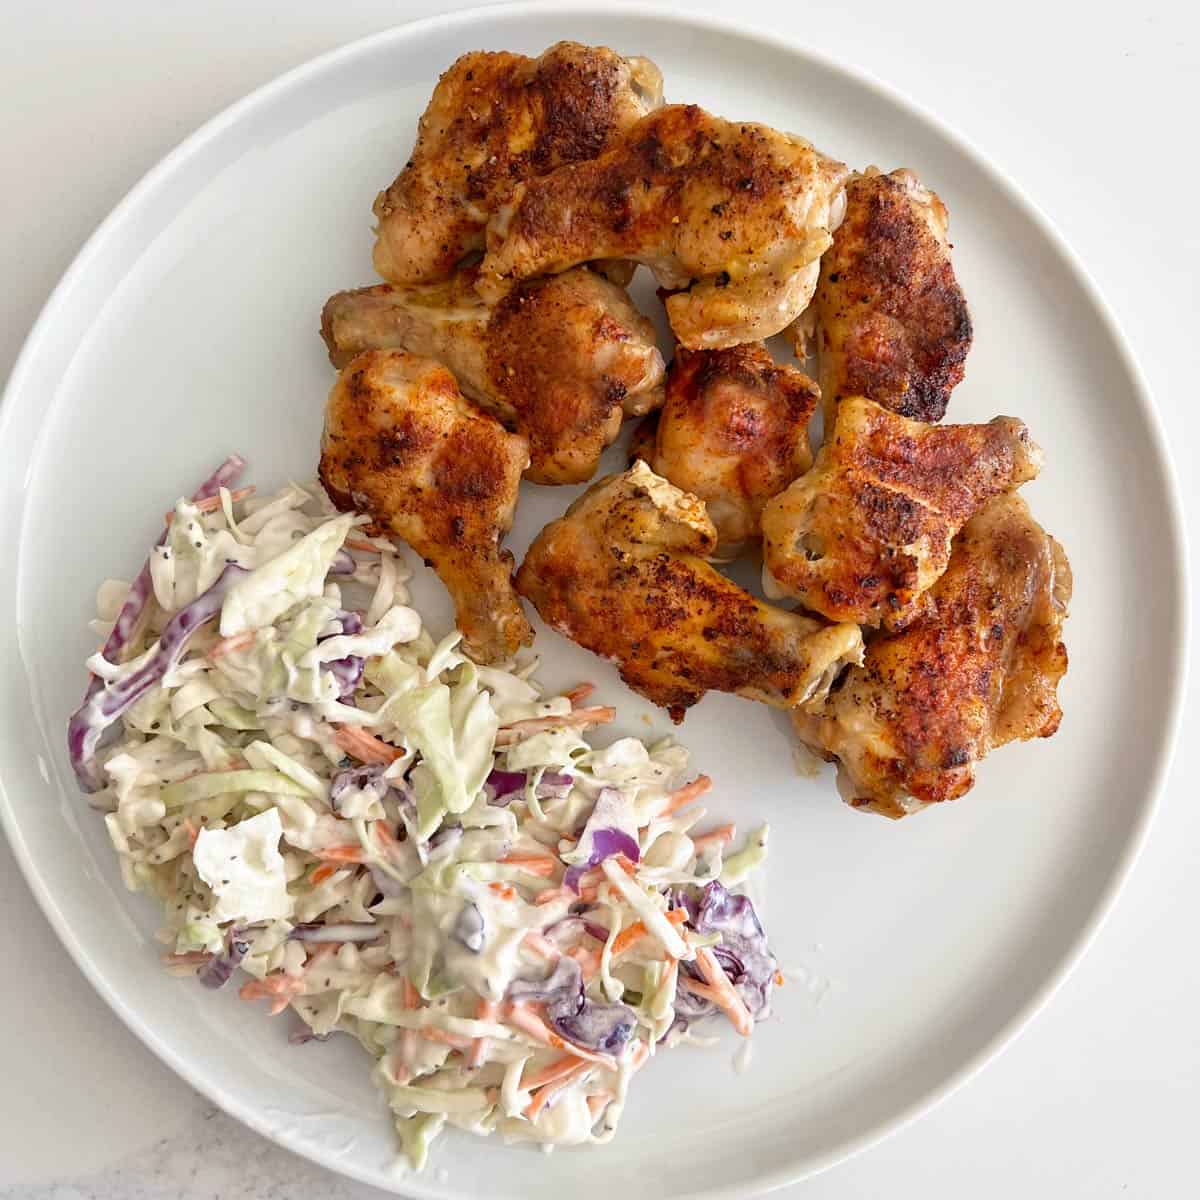 Baked chicken wings are served with coleslaw.